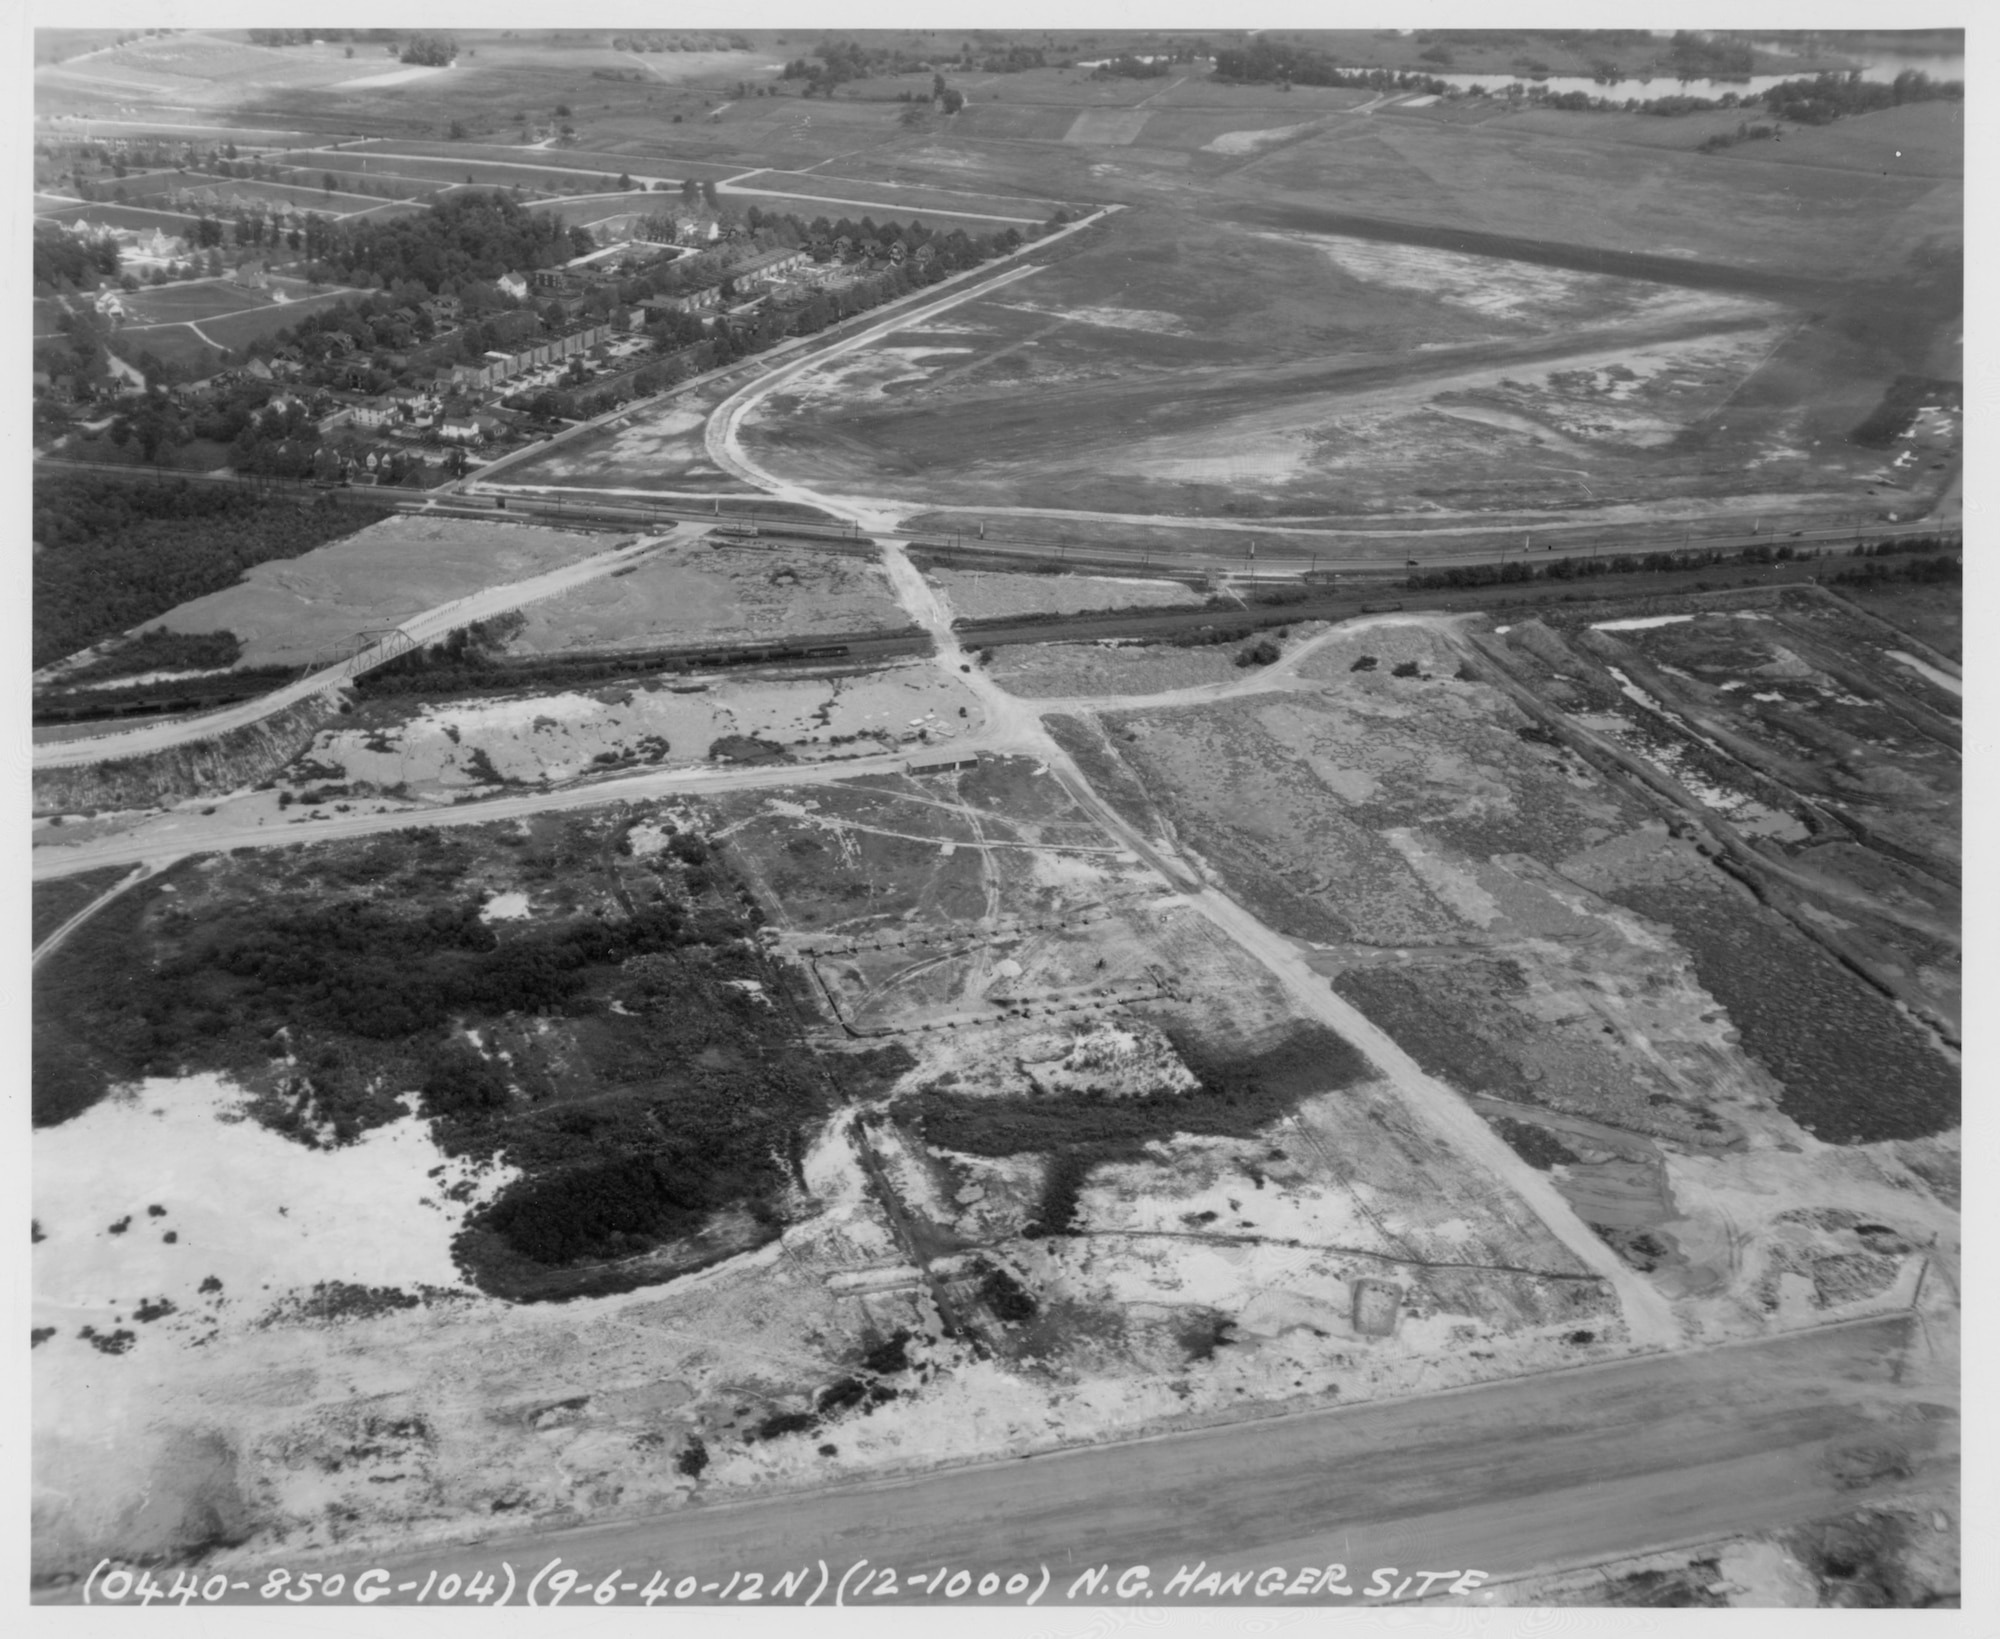 An aerial view of the Baltimore Municipal Airport (later renamed Harbor Field) under construction on Sept. 6, 1940. The location of the future National Guard hangar is visible near the center of the photo. Also visible, in the top half of the image, is Logan Field, the Maryland Air National Guard's first home base. (Released)